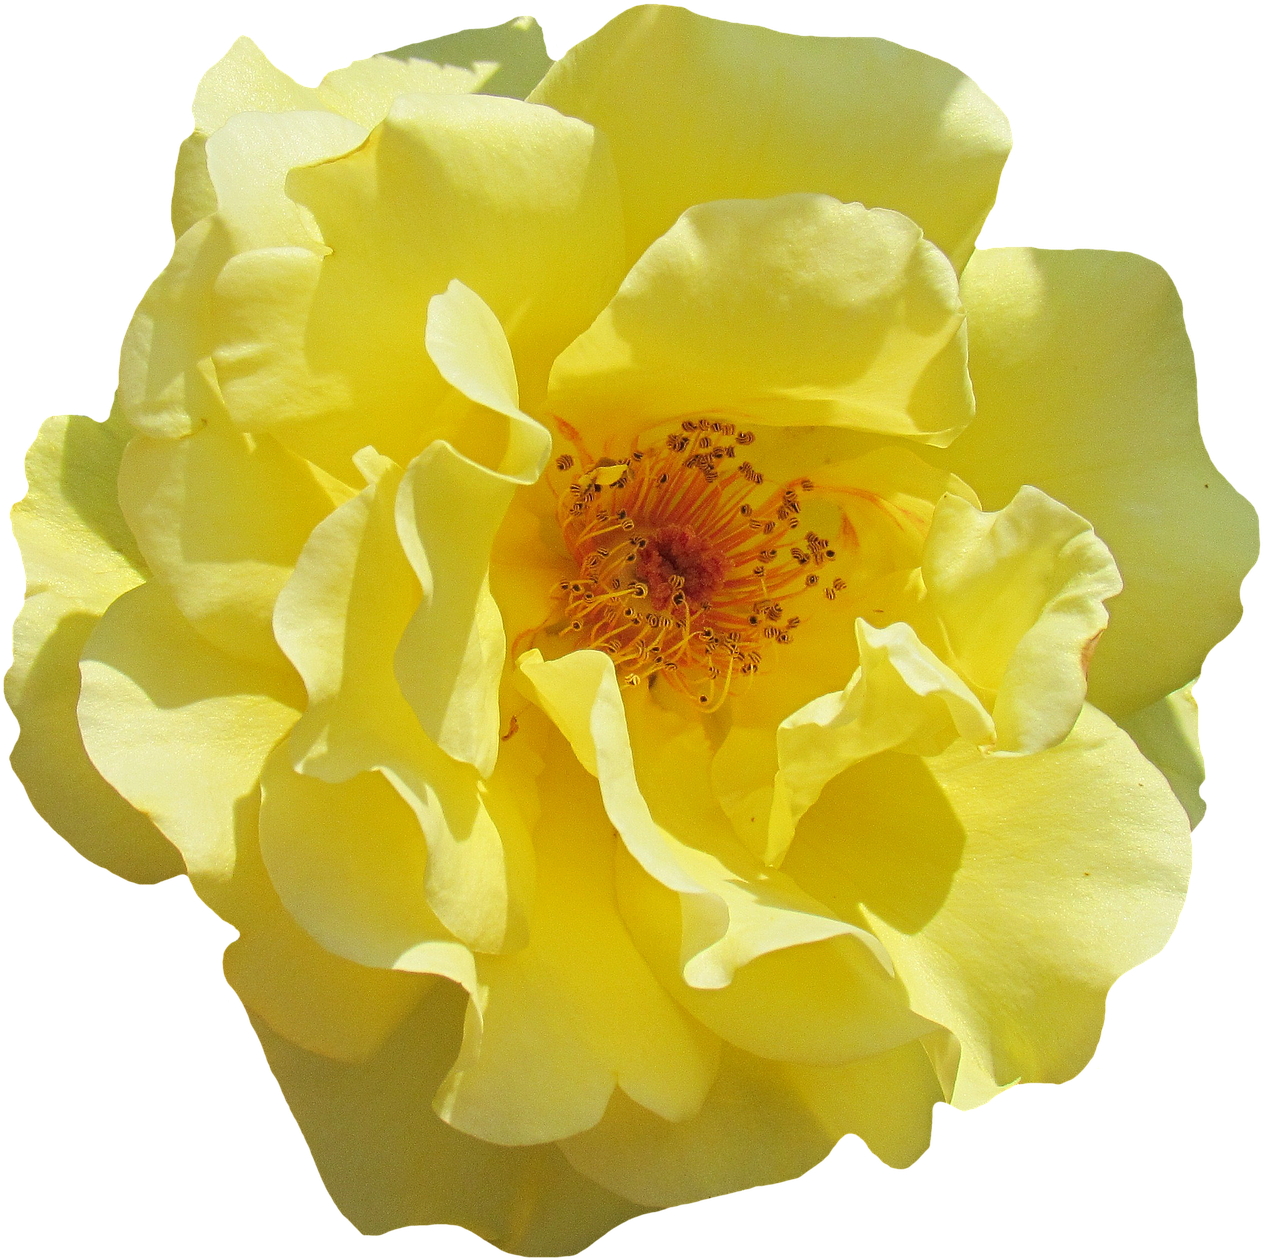 Rose, Blossom, Bloom, Yellow, Flowers, Garden Roses - Paco Rabanne Lady Million Lucky (714x720), Png Download